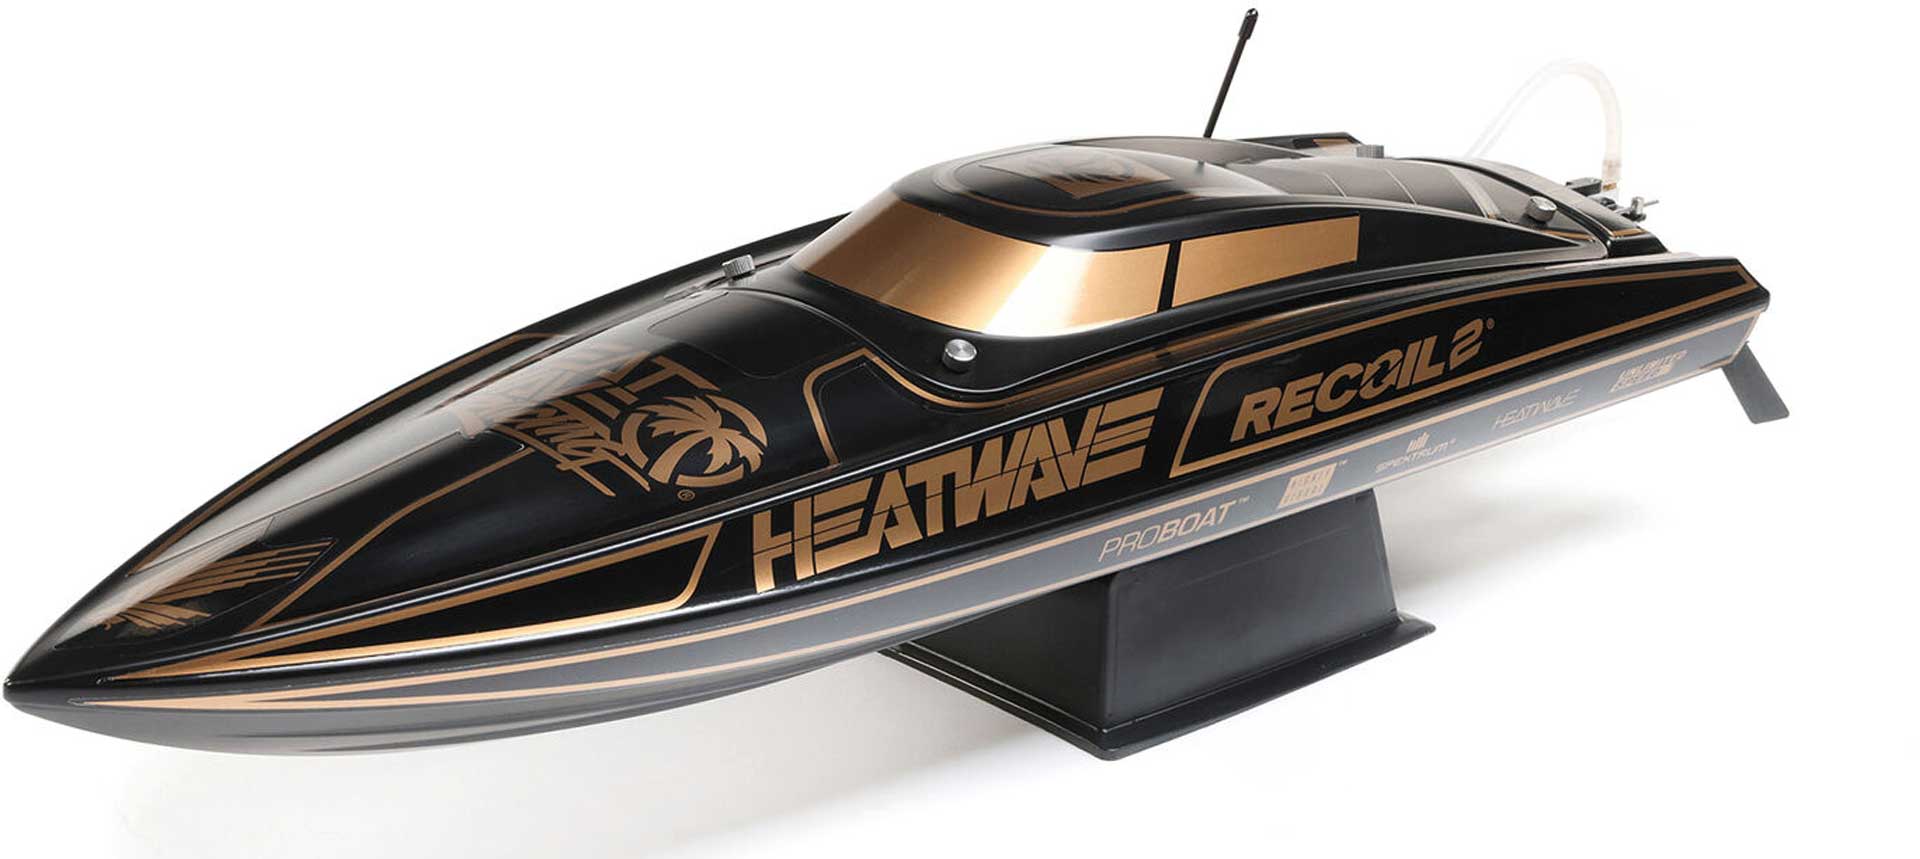 PROBOAT Heatwave Recoil 2 26" Self-Righting, RTR